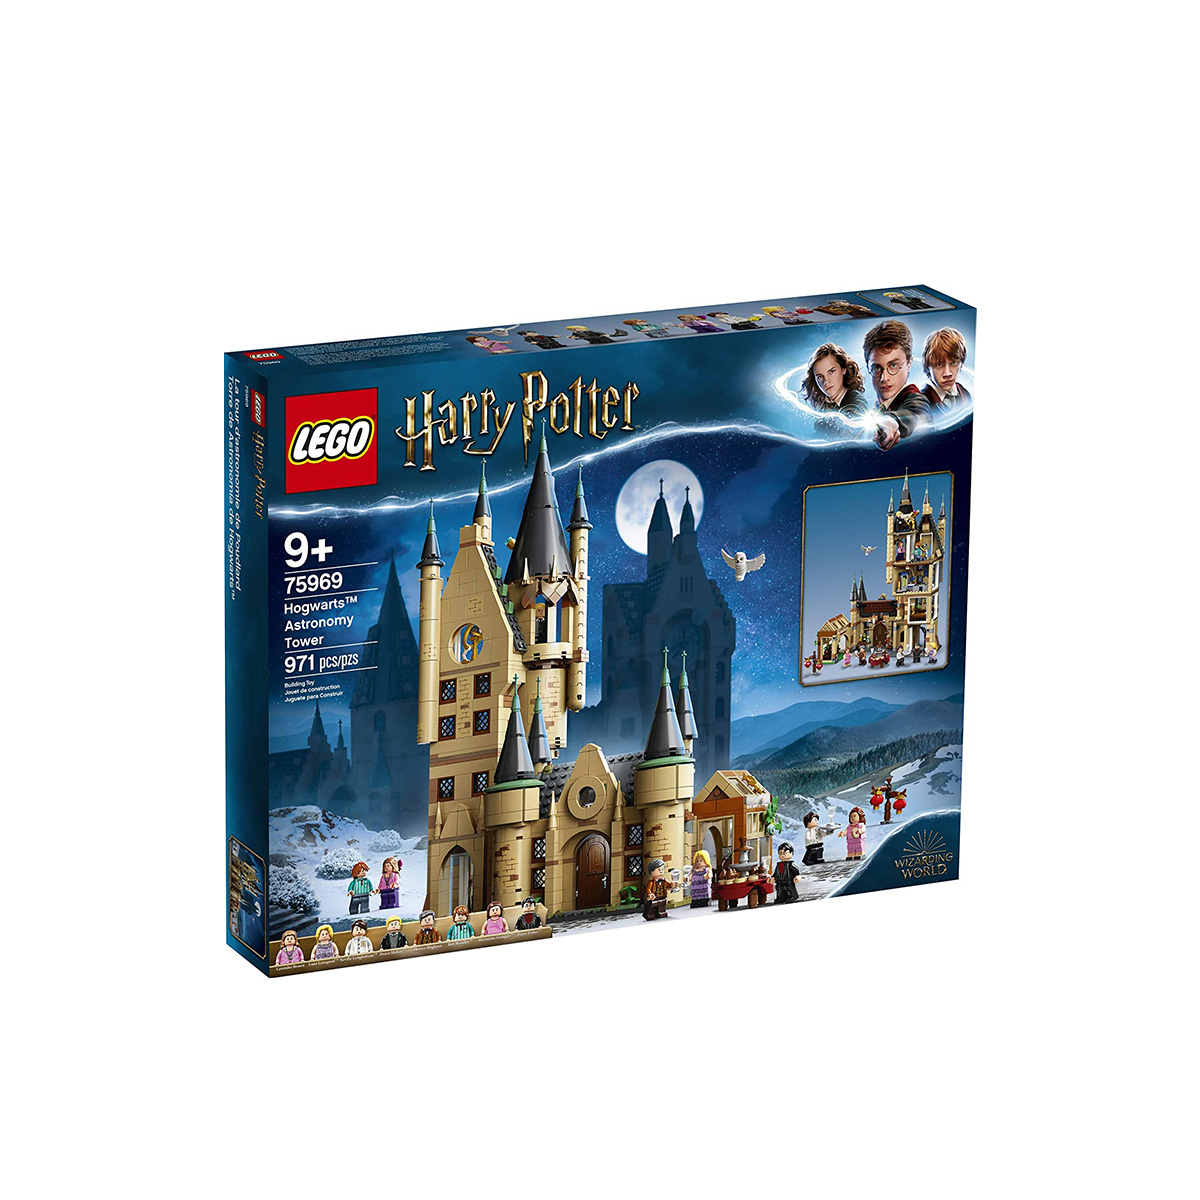 Lego-Harry Potter Hogwarts Astronomy Tower 971 Pieces -  – Online  shop of Super chain stores